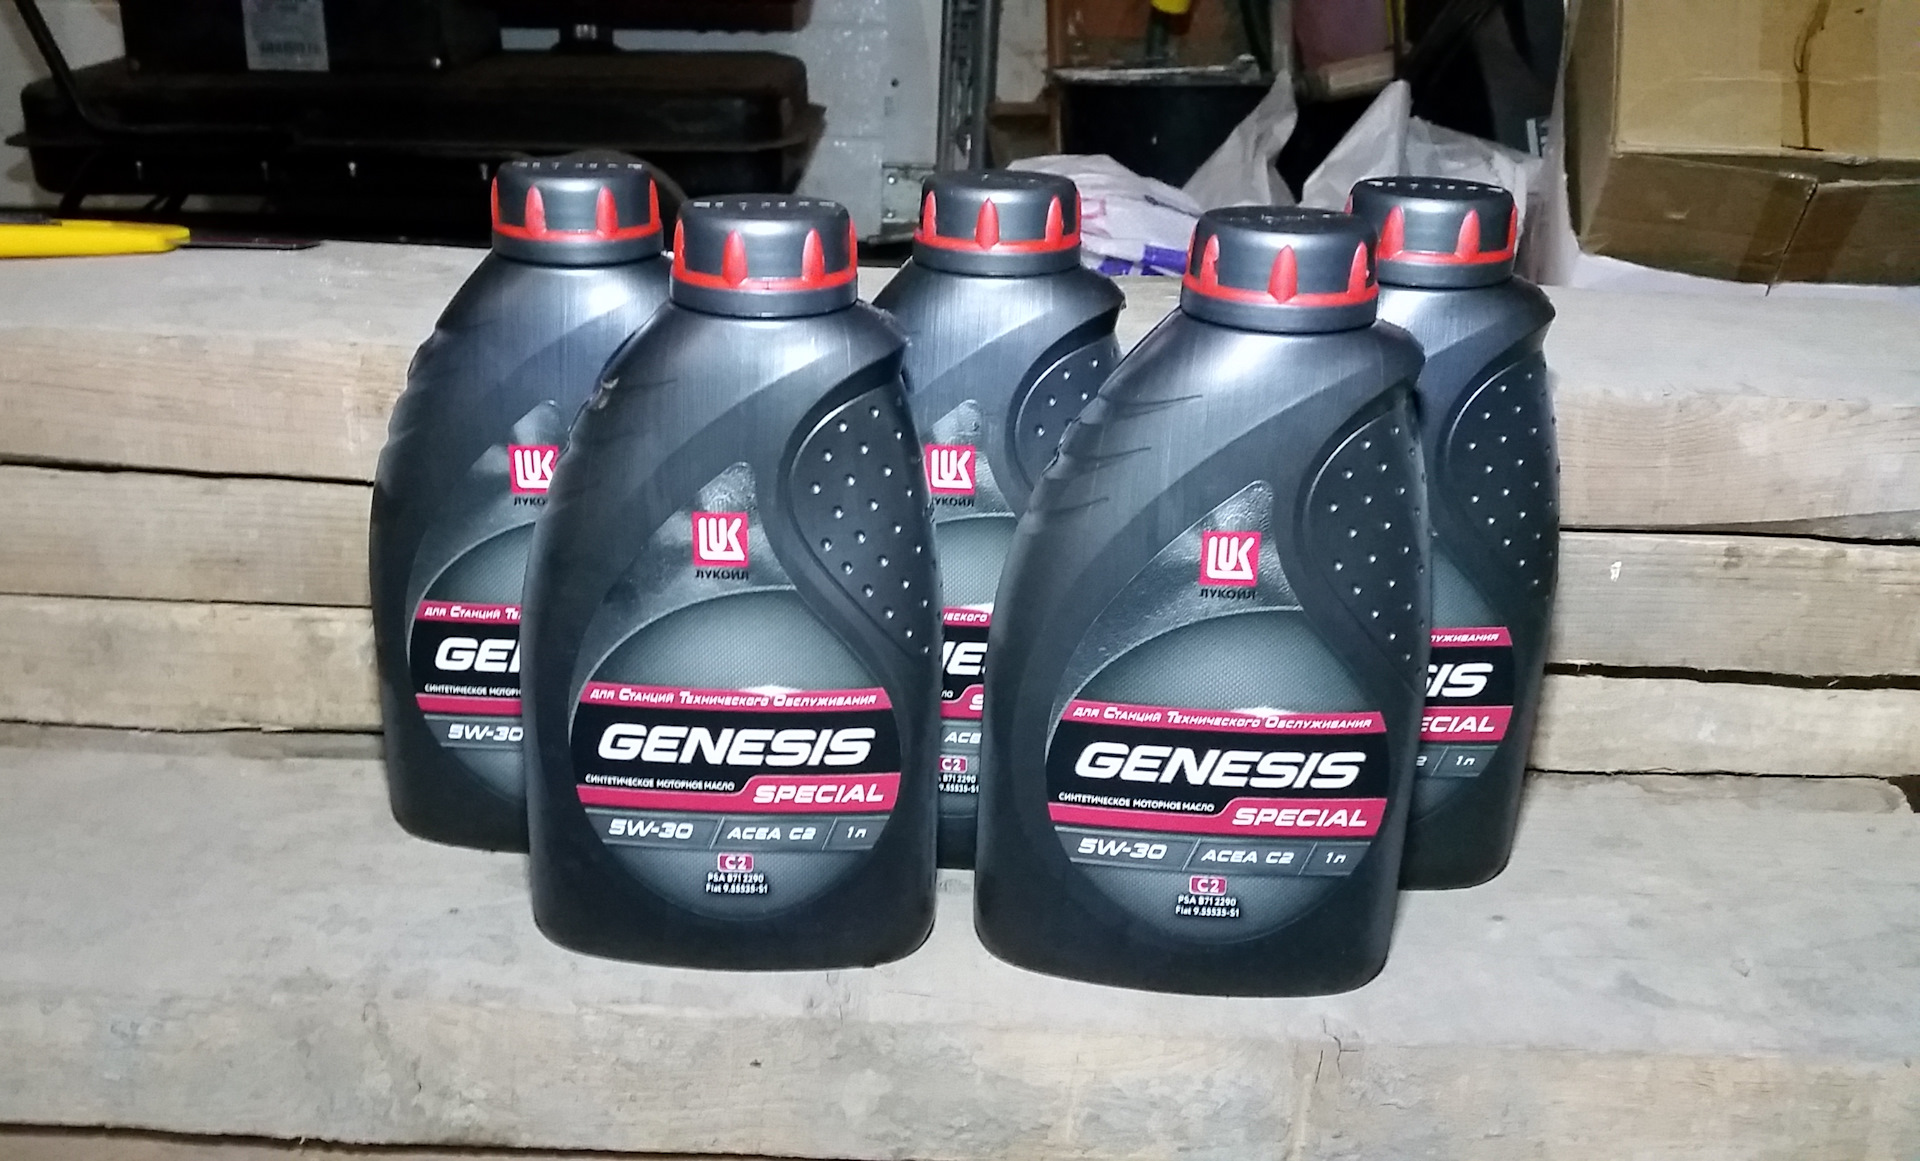 Lukoil Genesis Special c2 5w-30. Genesis Special 5w30. Лукойл Генезис специал 5w30 с4. Масло лукойл special 5w30